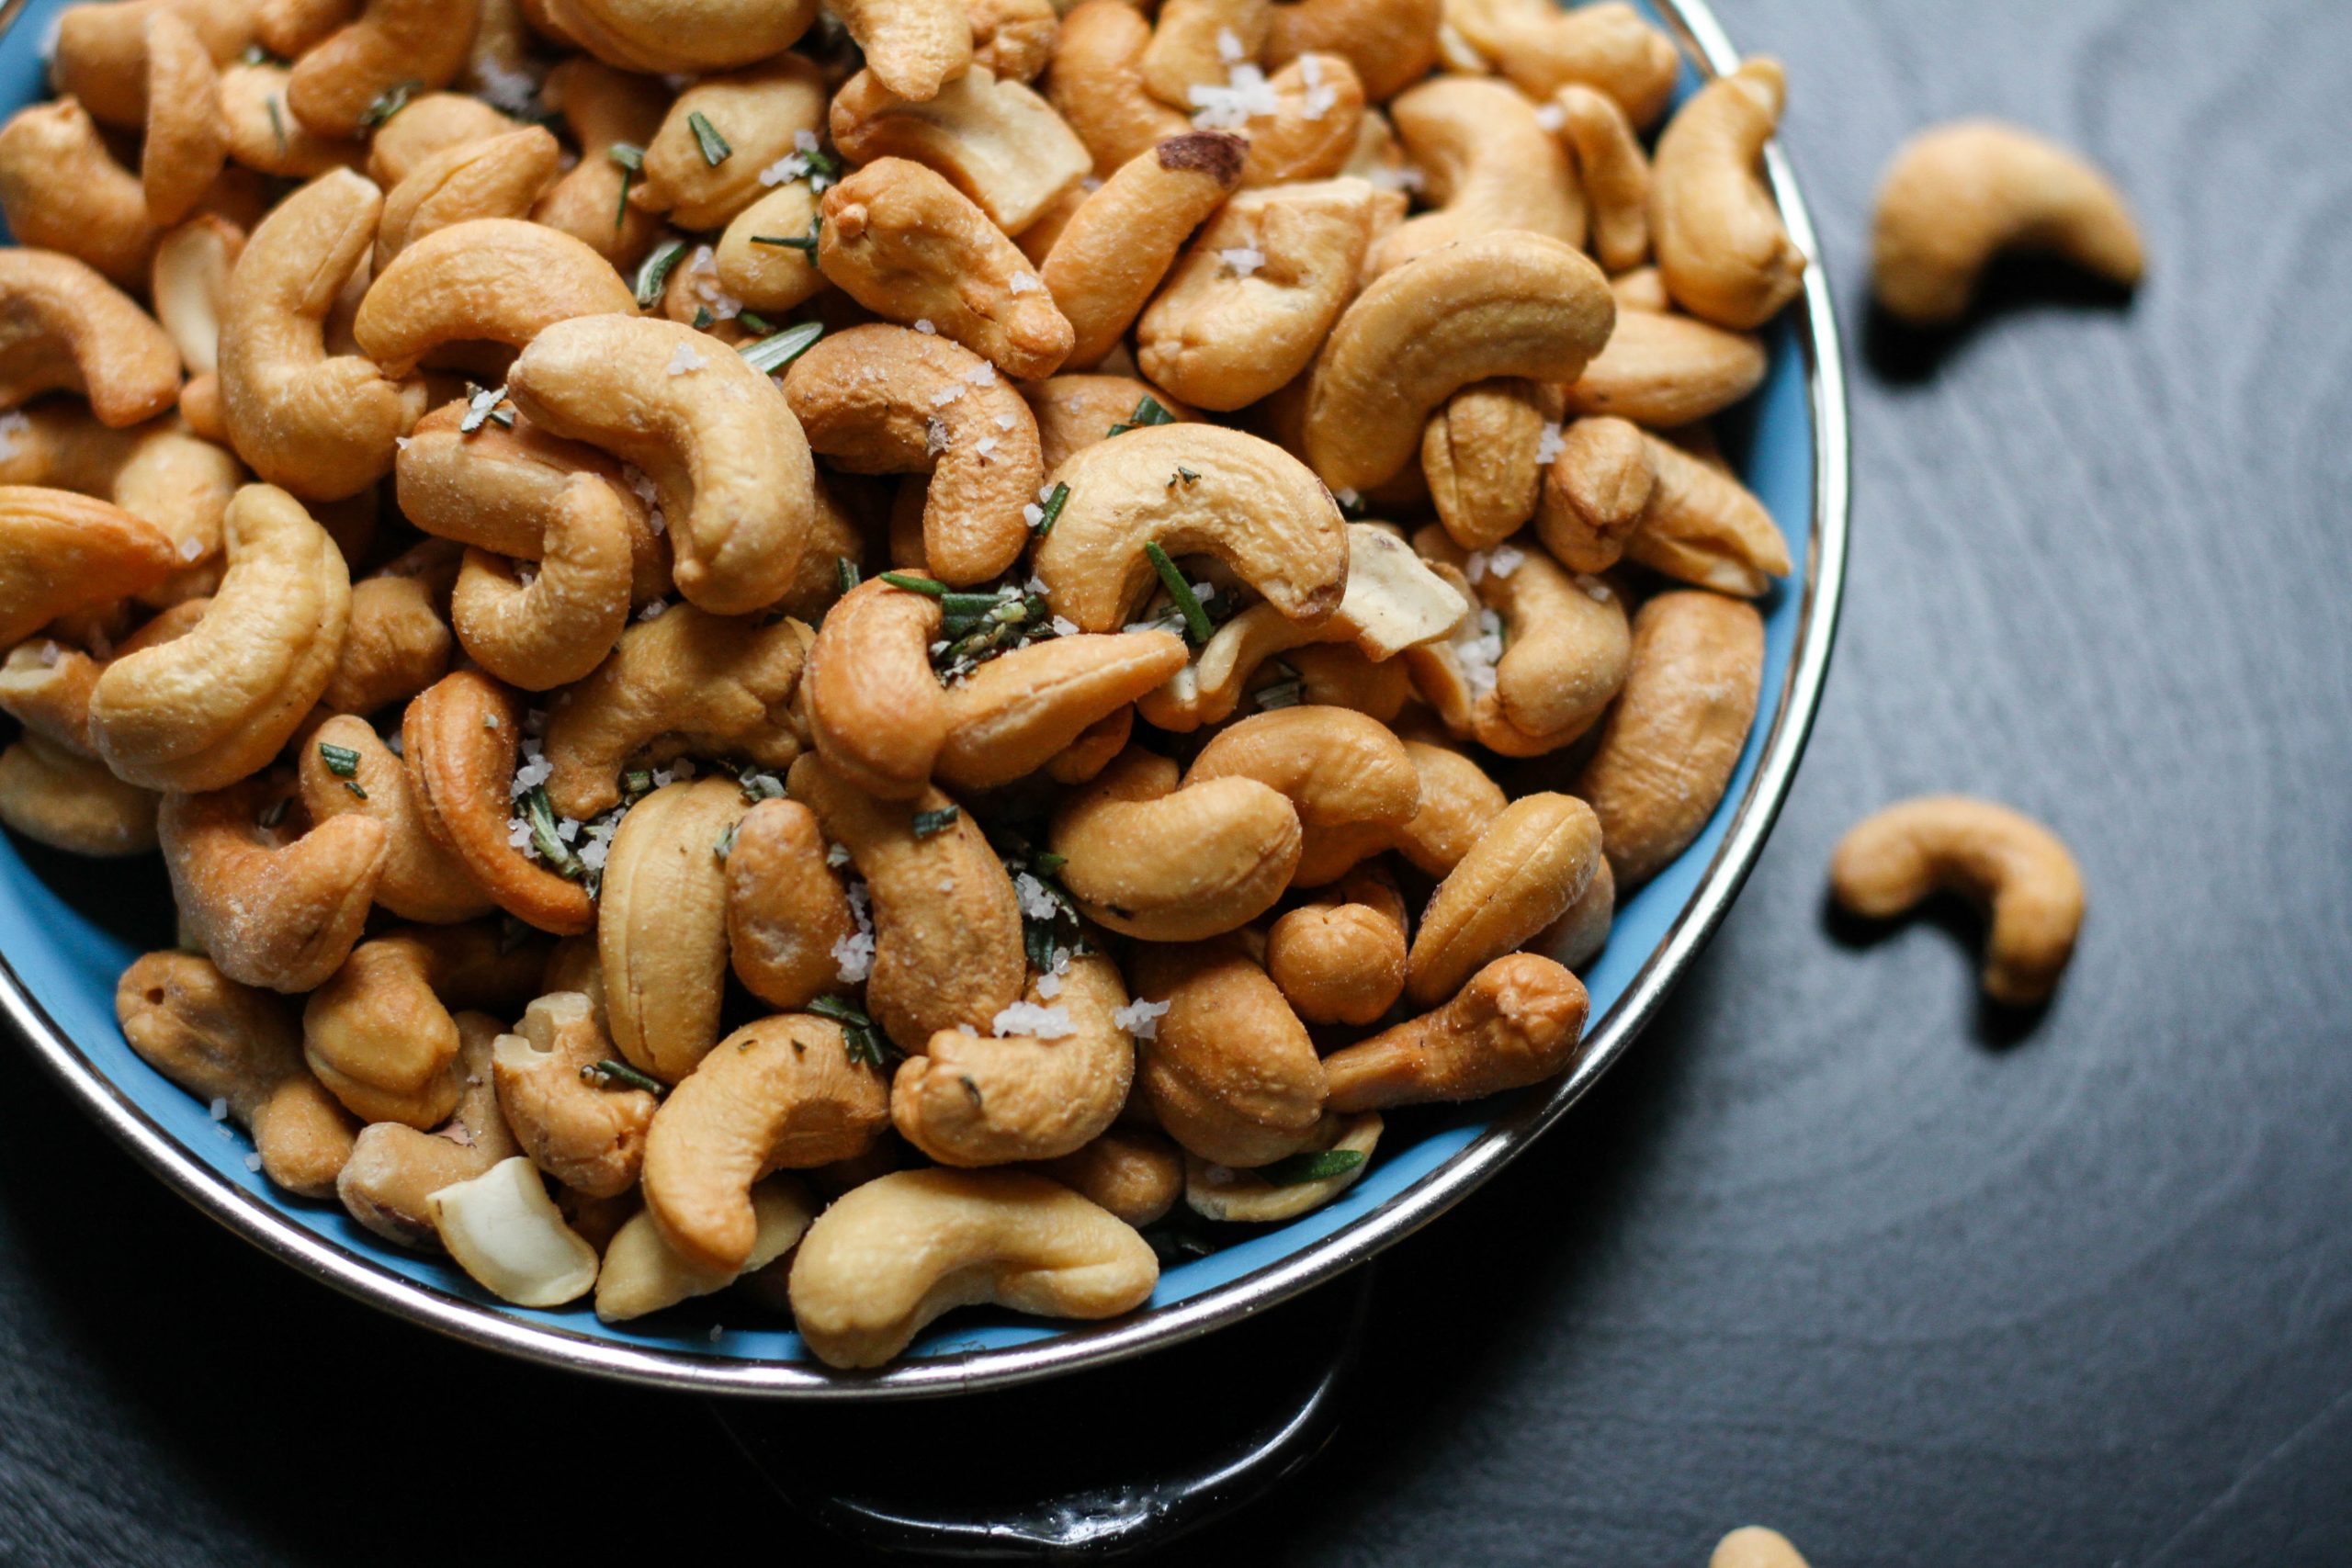 Cashews are a great source of phosphorus, which is one of the essential minerals for health.